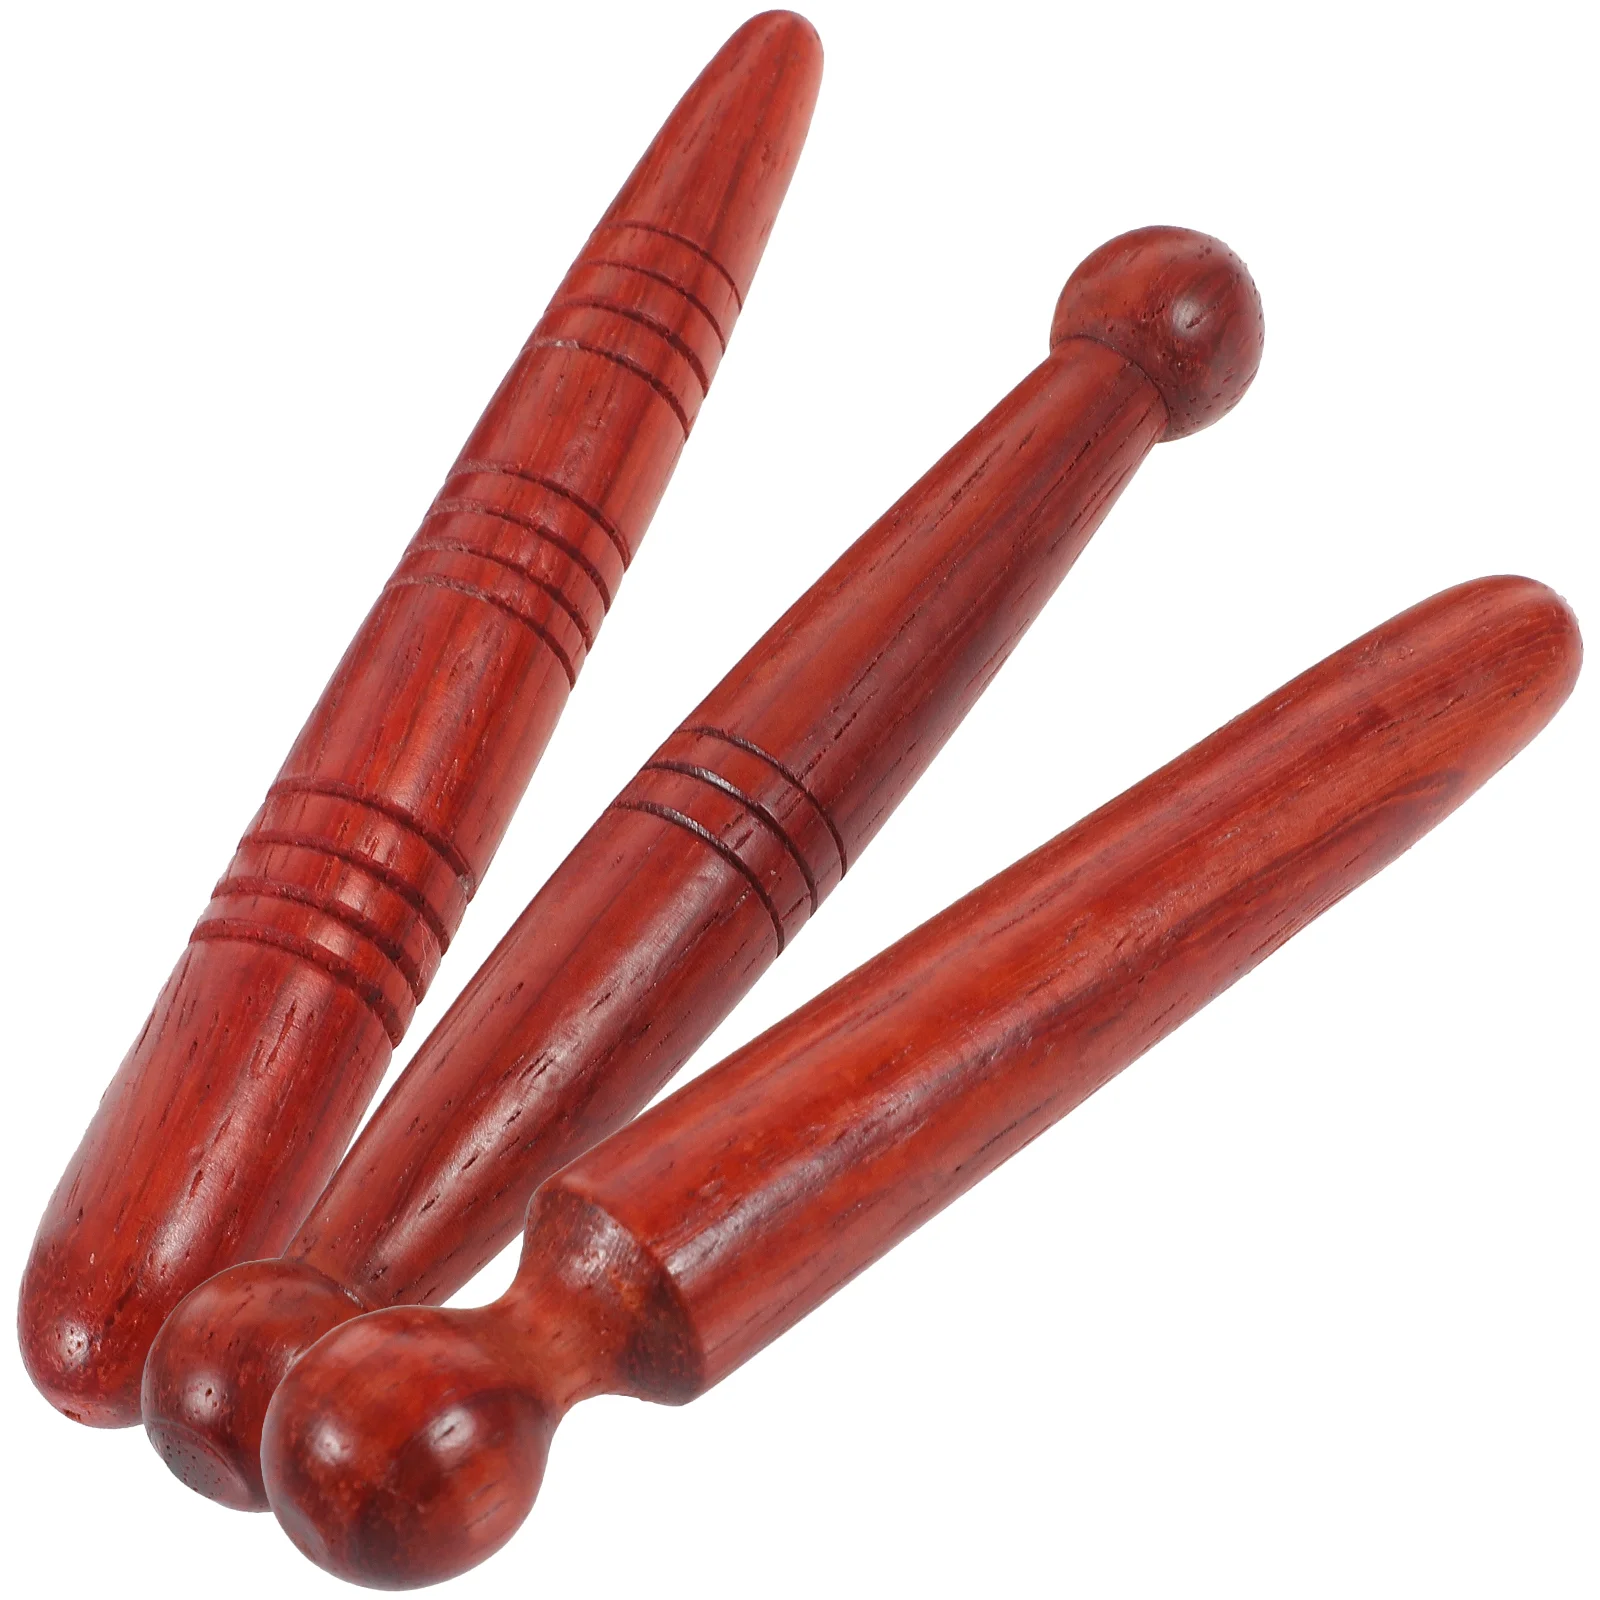 3 Pcs Acupressure Stick Practical Wood Massager Tool Hand Held Foot Tools Massagers Sticks Wooden Point Industrial buttock hand held wooden turning tool 12pcs set hss lathe chisel set woodworking turning tool set hss high speed steel semicircle knife